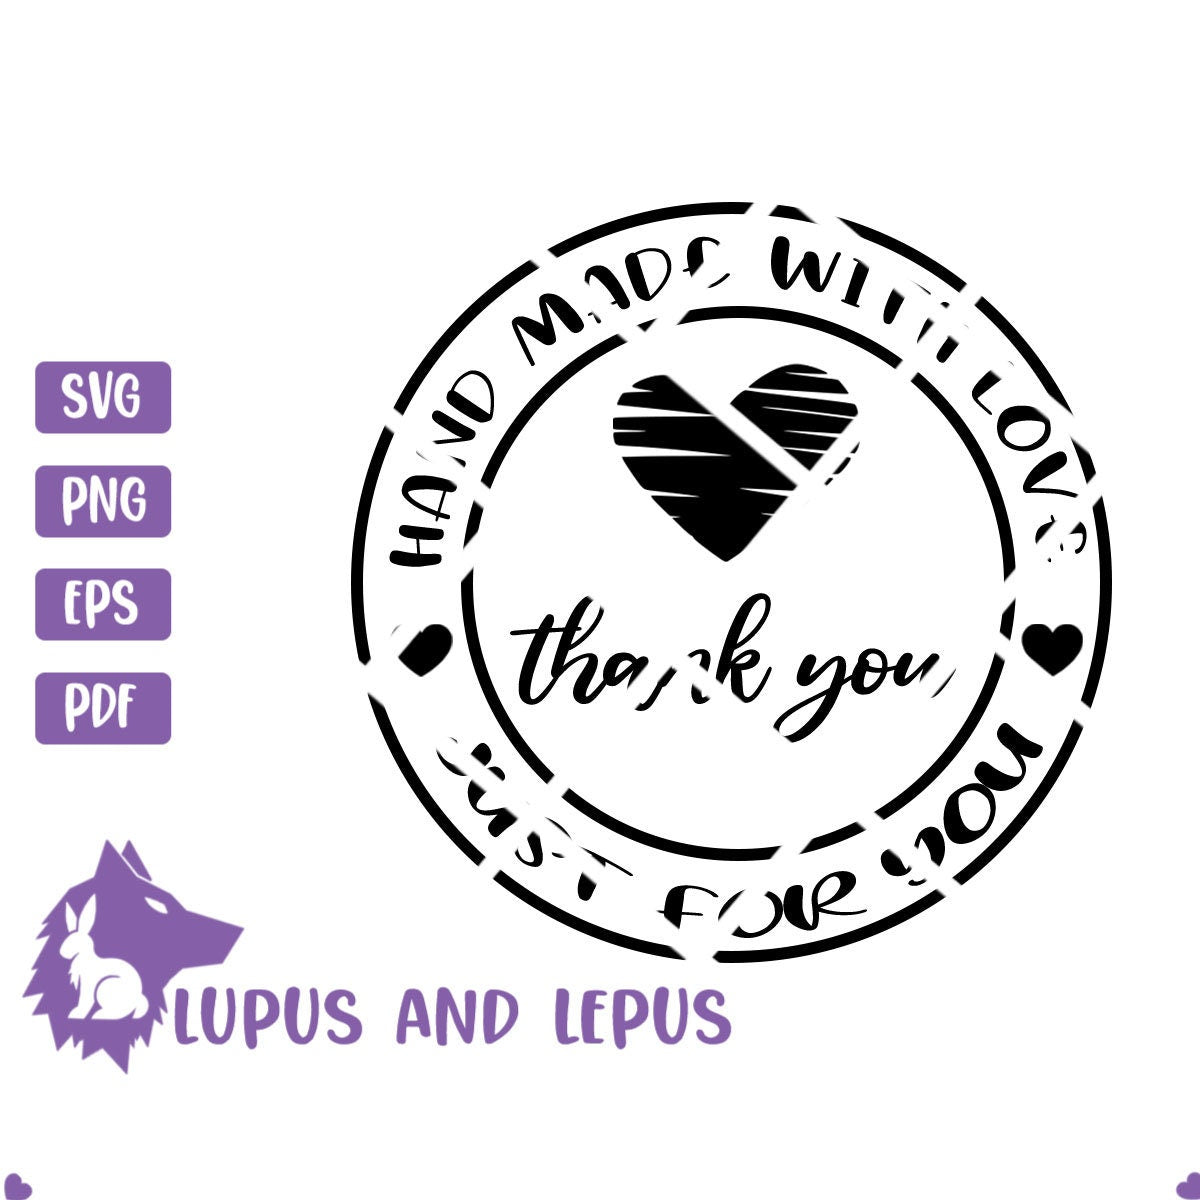 Digital File - hand made with love svg, thank you svg, thank you stamp, made with love svg, handmade svg, small business svg, valentine svg